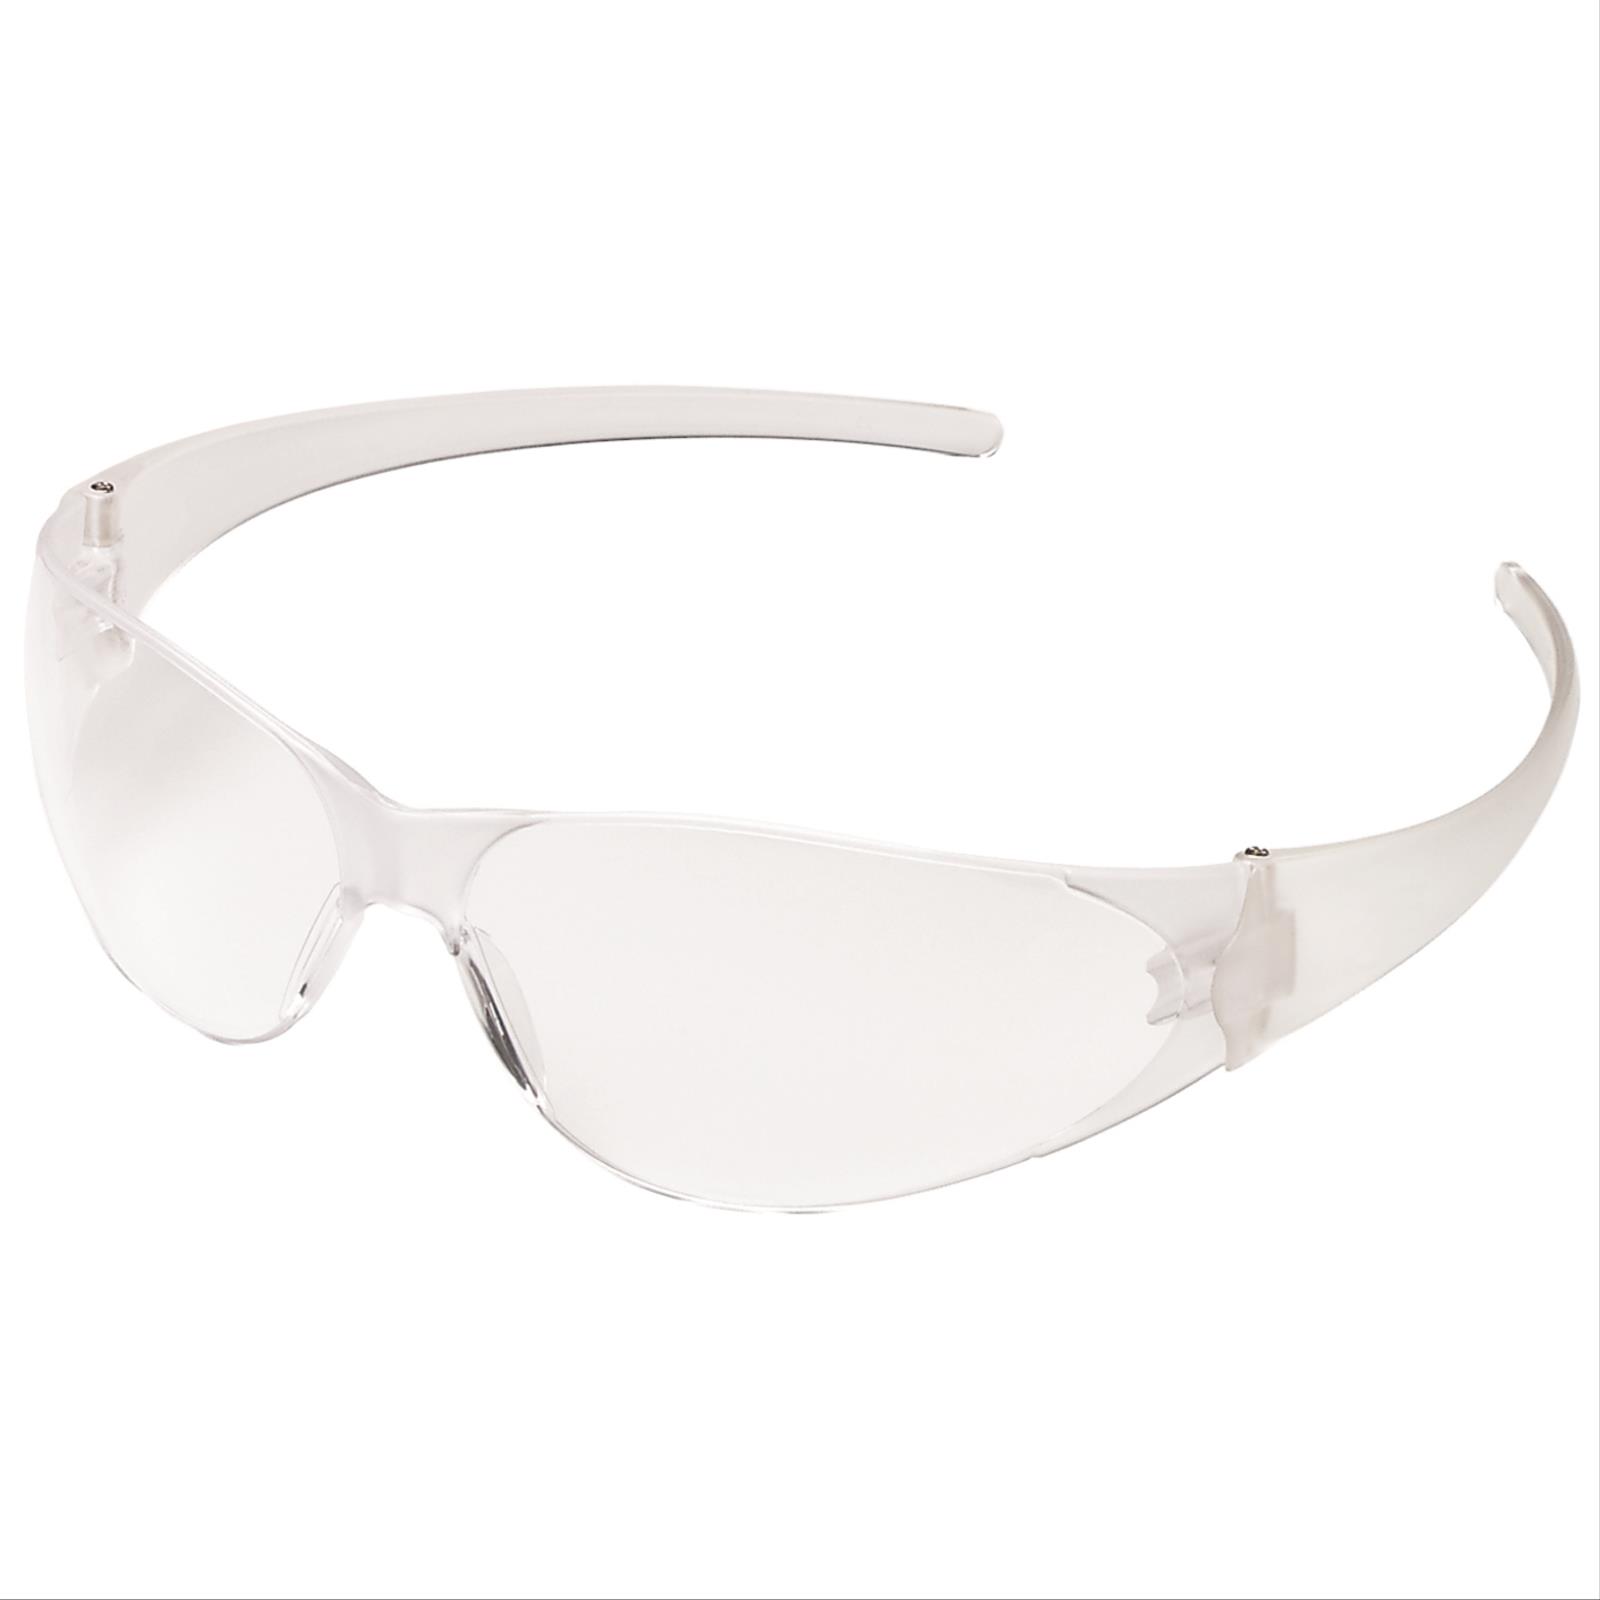 Crews Checkmate CK2® Safety Glasses